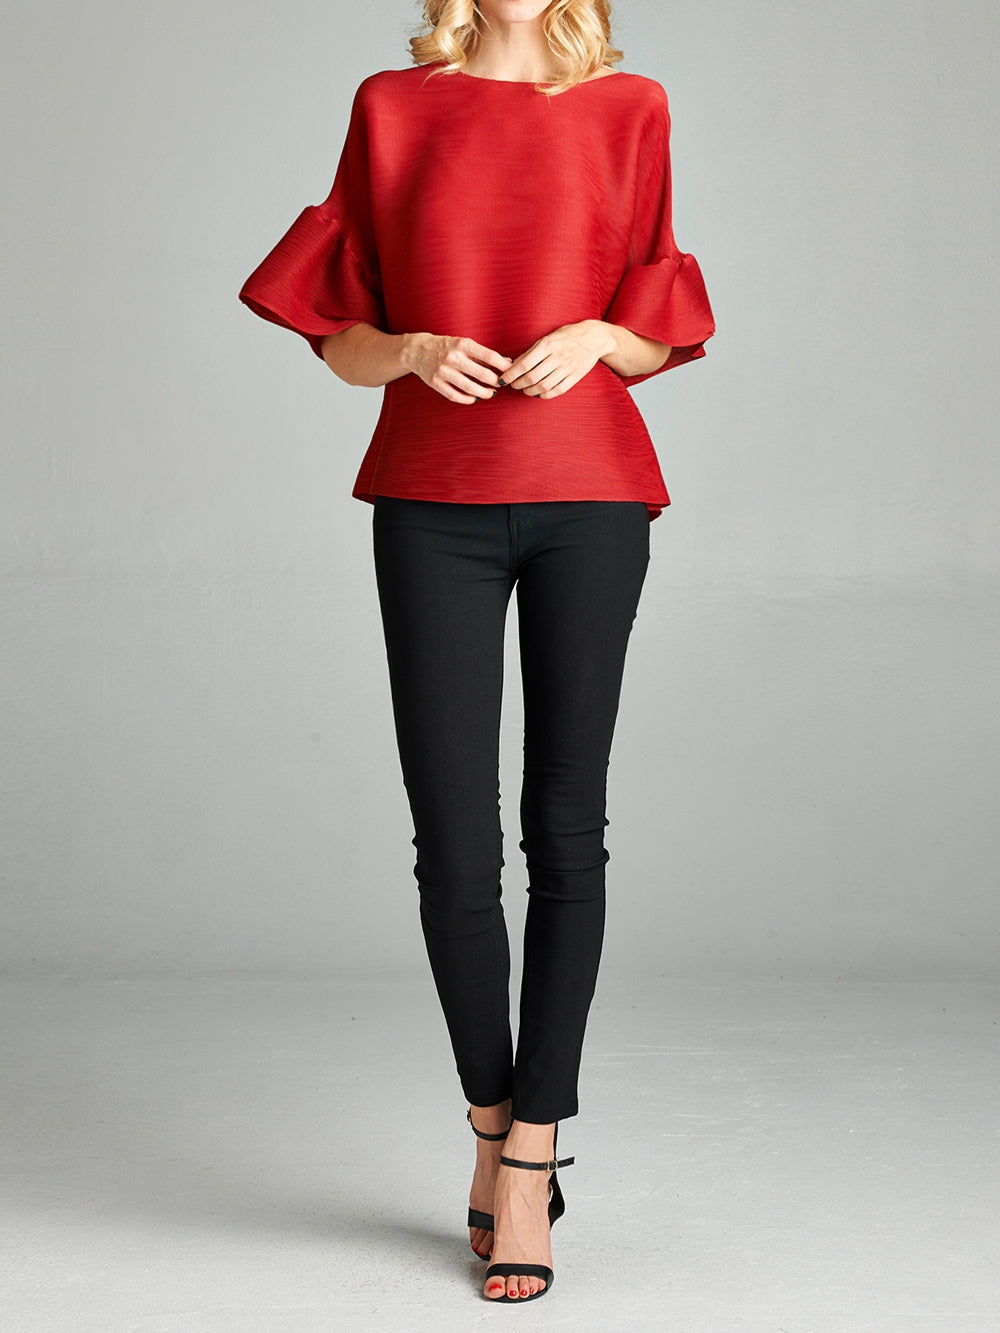 Pleated Red Audrey Top VLW115